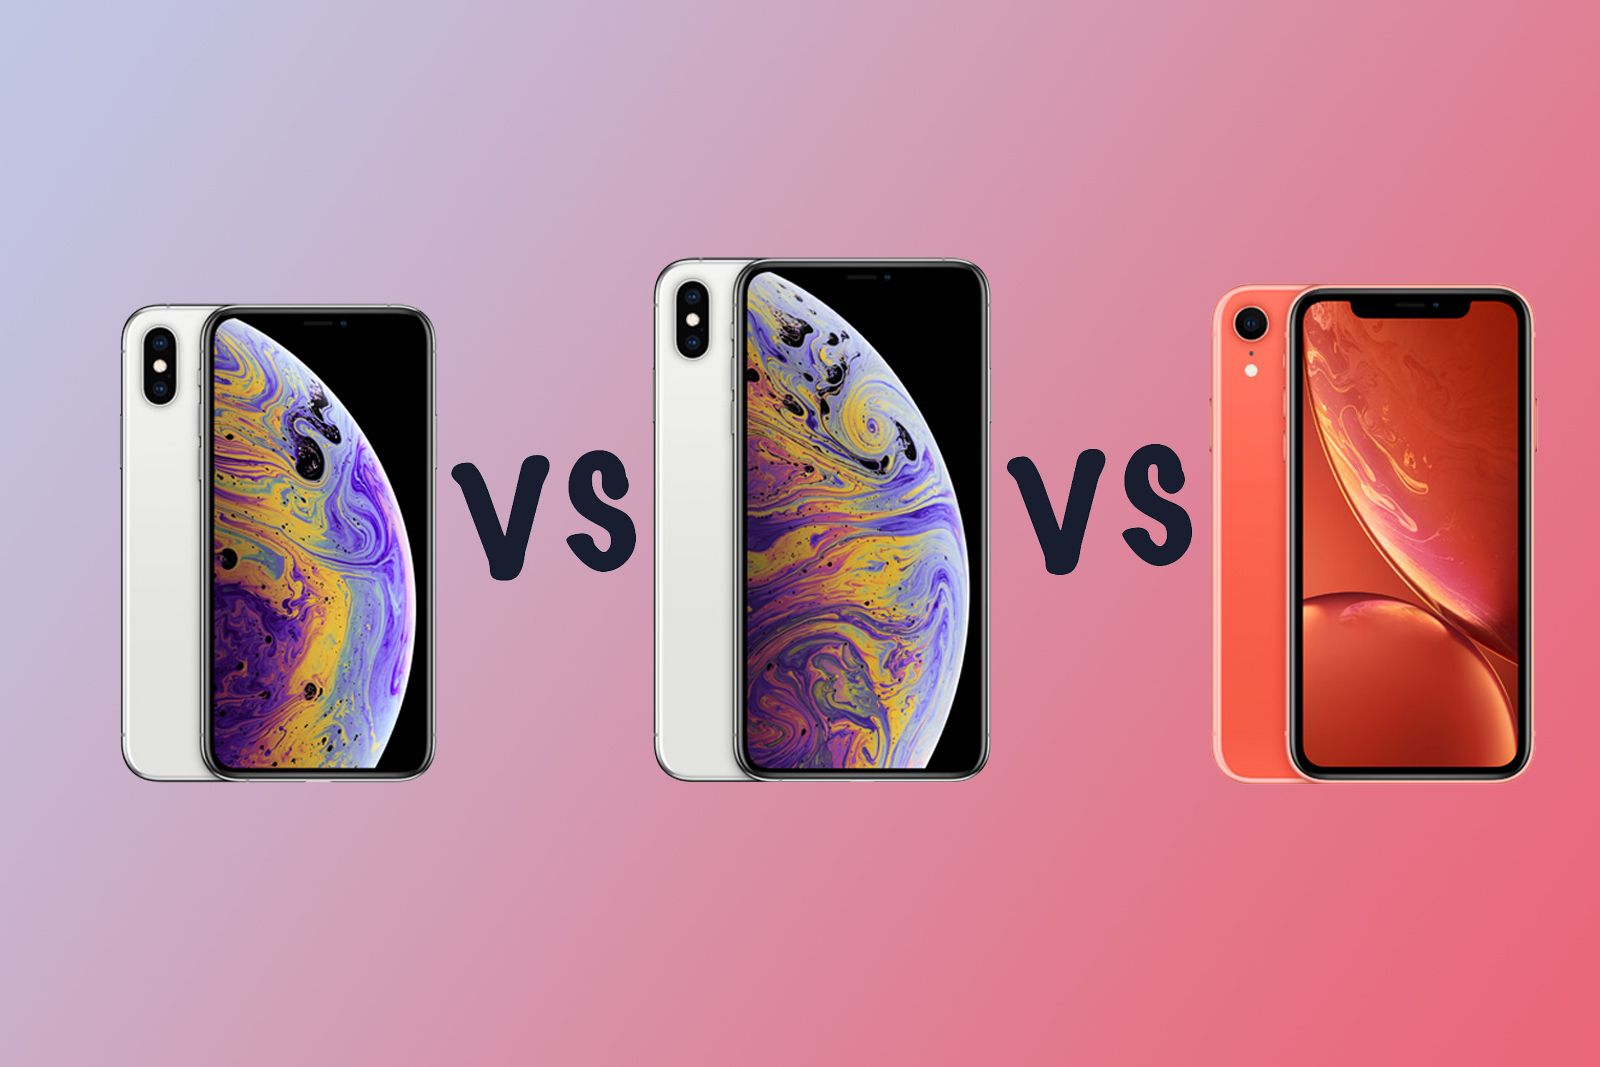 Apple iPhone XS vs XS Max vs iPhone XR: What's the difference?